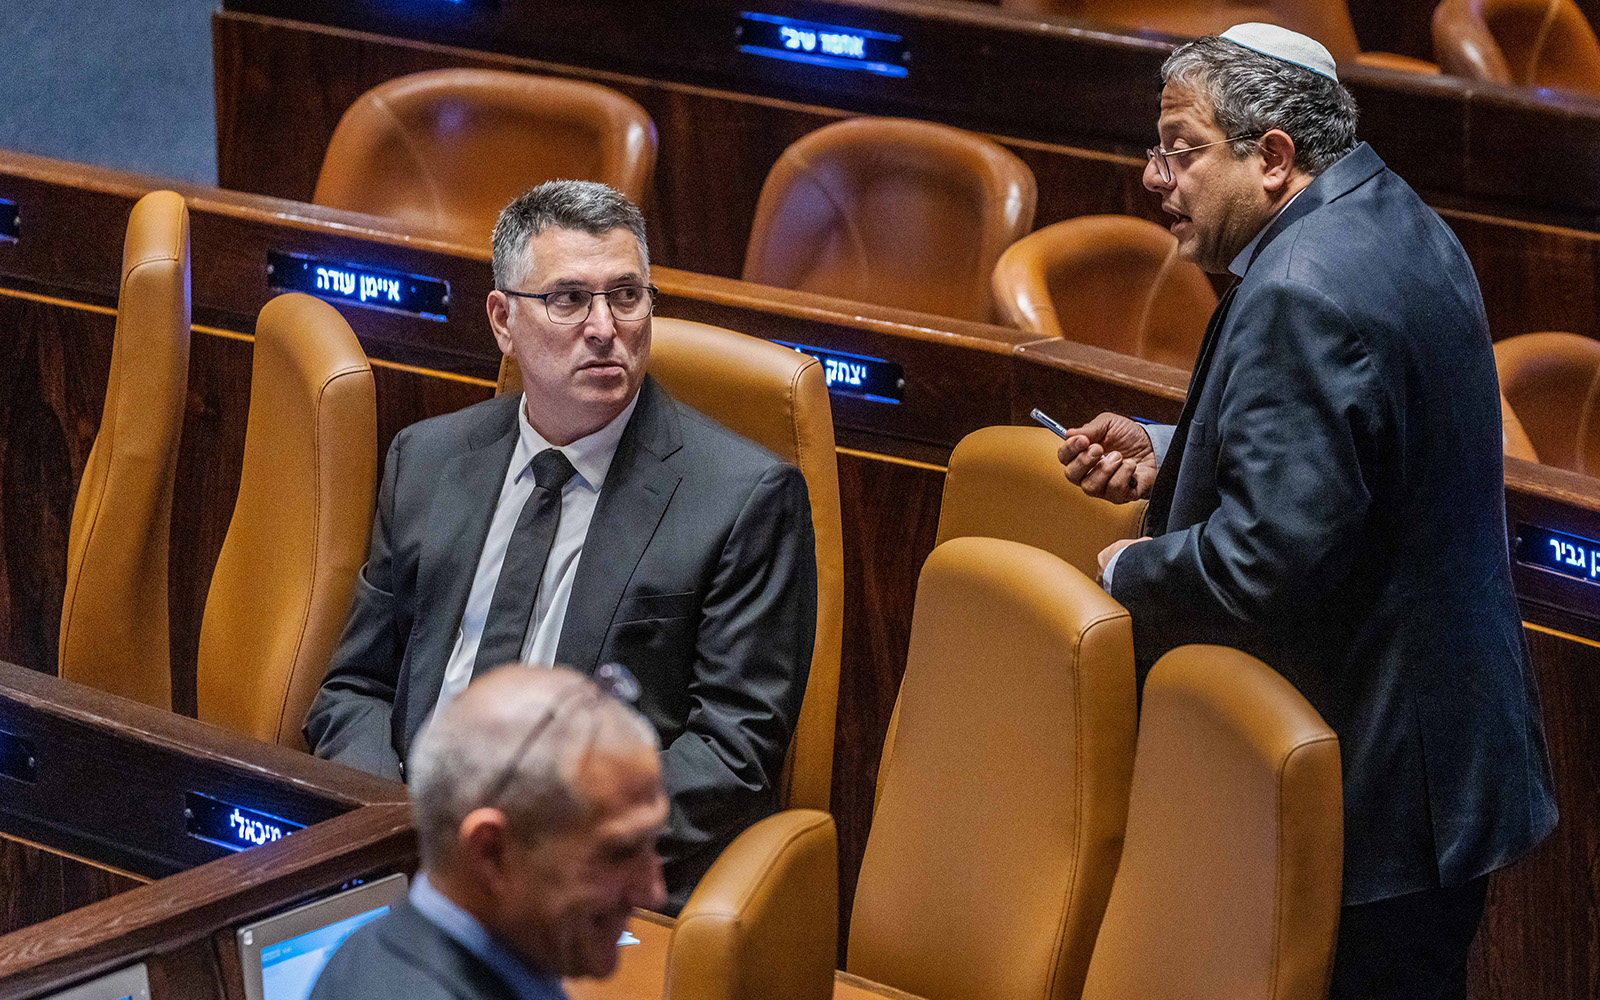 Outgoing Justice Minister Gideon Sa’ar, left, and Otzma Yehudit party leader Itamar Ben Gvir, right, attend a vote during a plenum session at the assembly hall of the Knesset in Jerusalem, on December 15, 2022. (Olivier Fitoussi/Flash90)